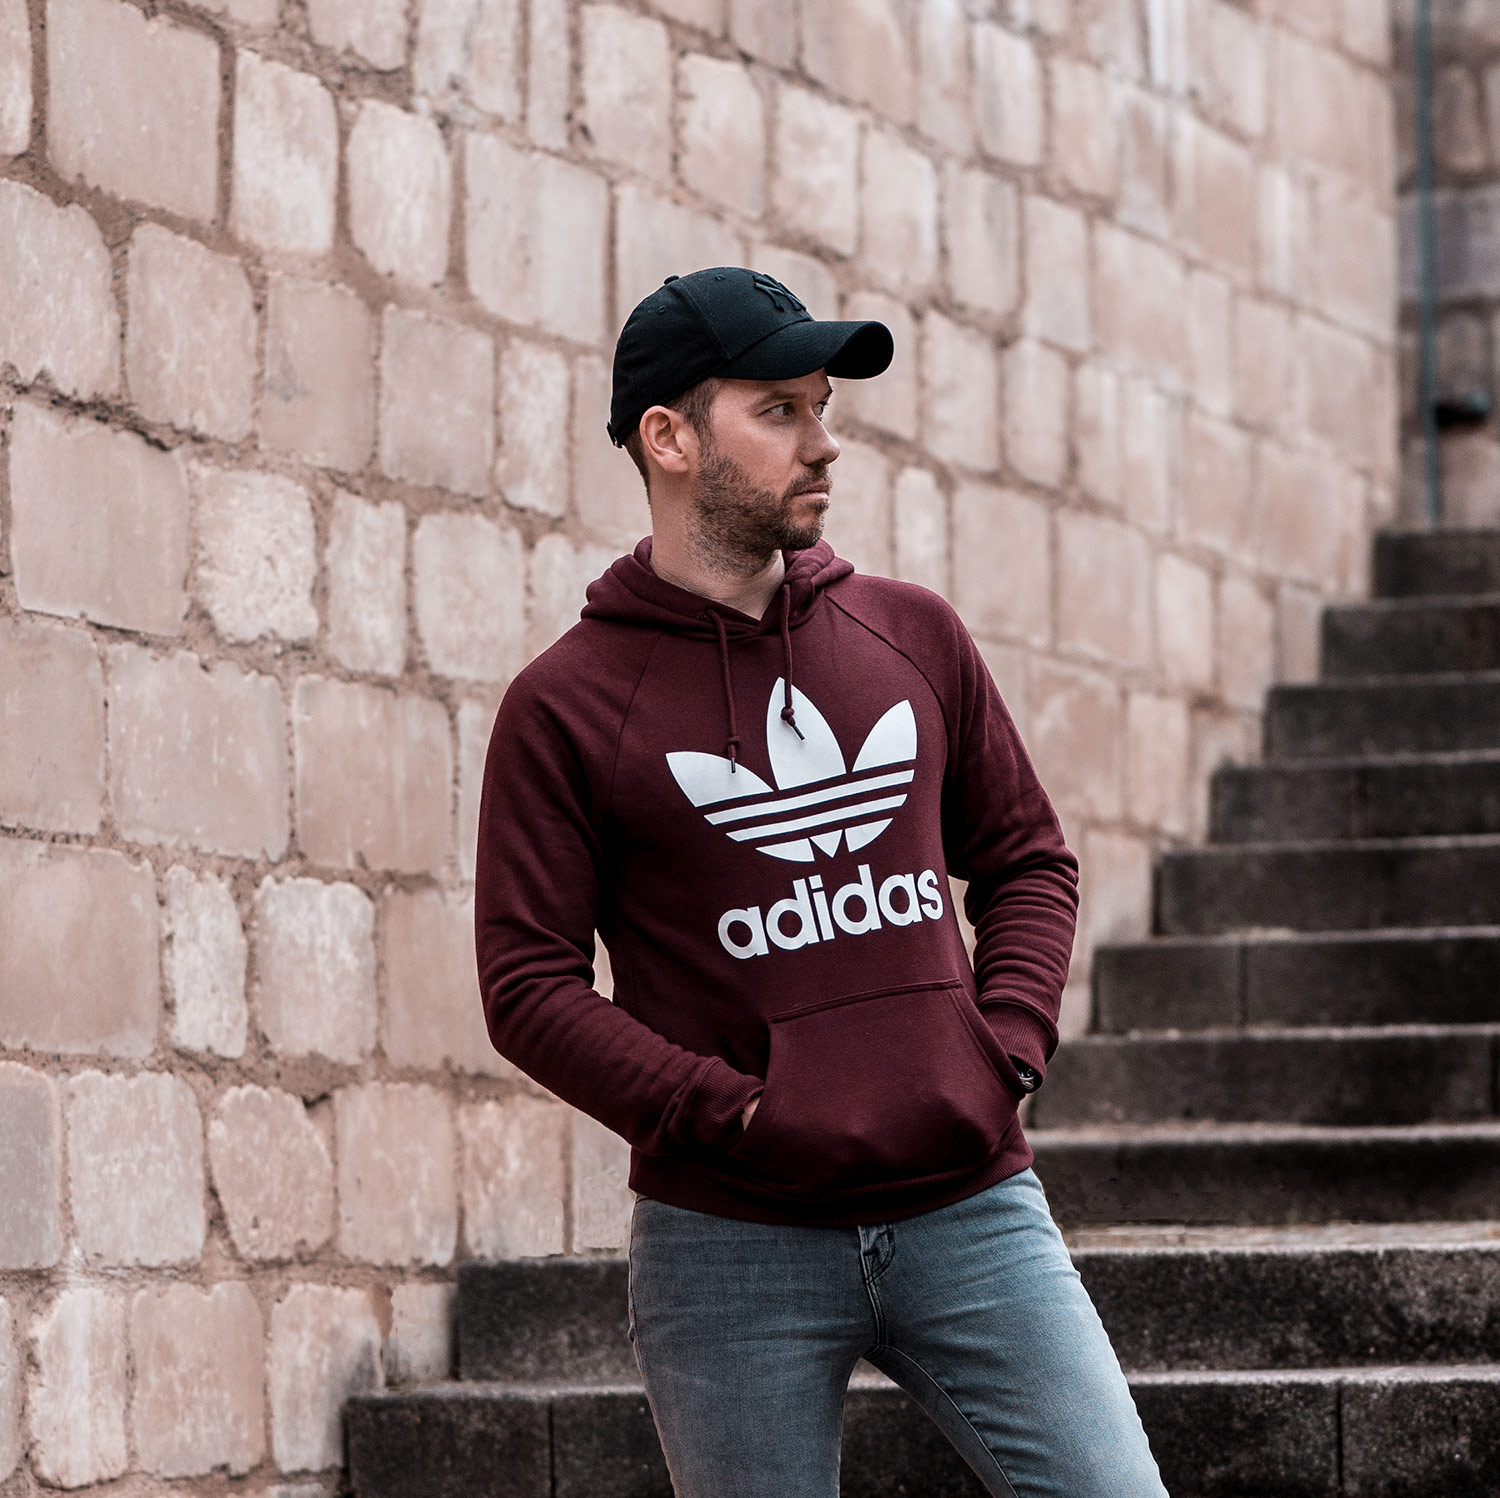 Adidas Burgundy And J Brand Grey Skinny Jeans Outfit | Your Average Guy